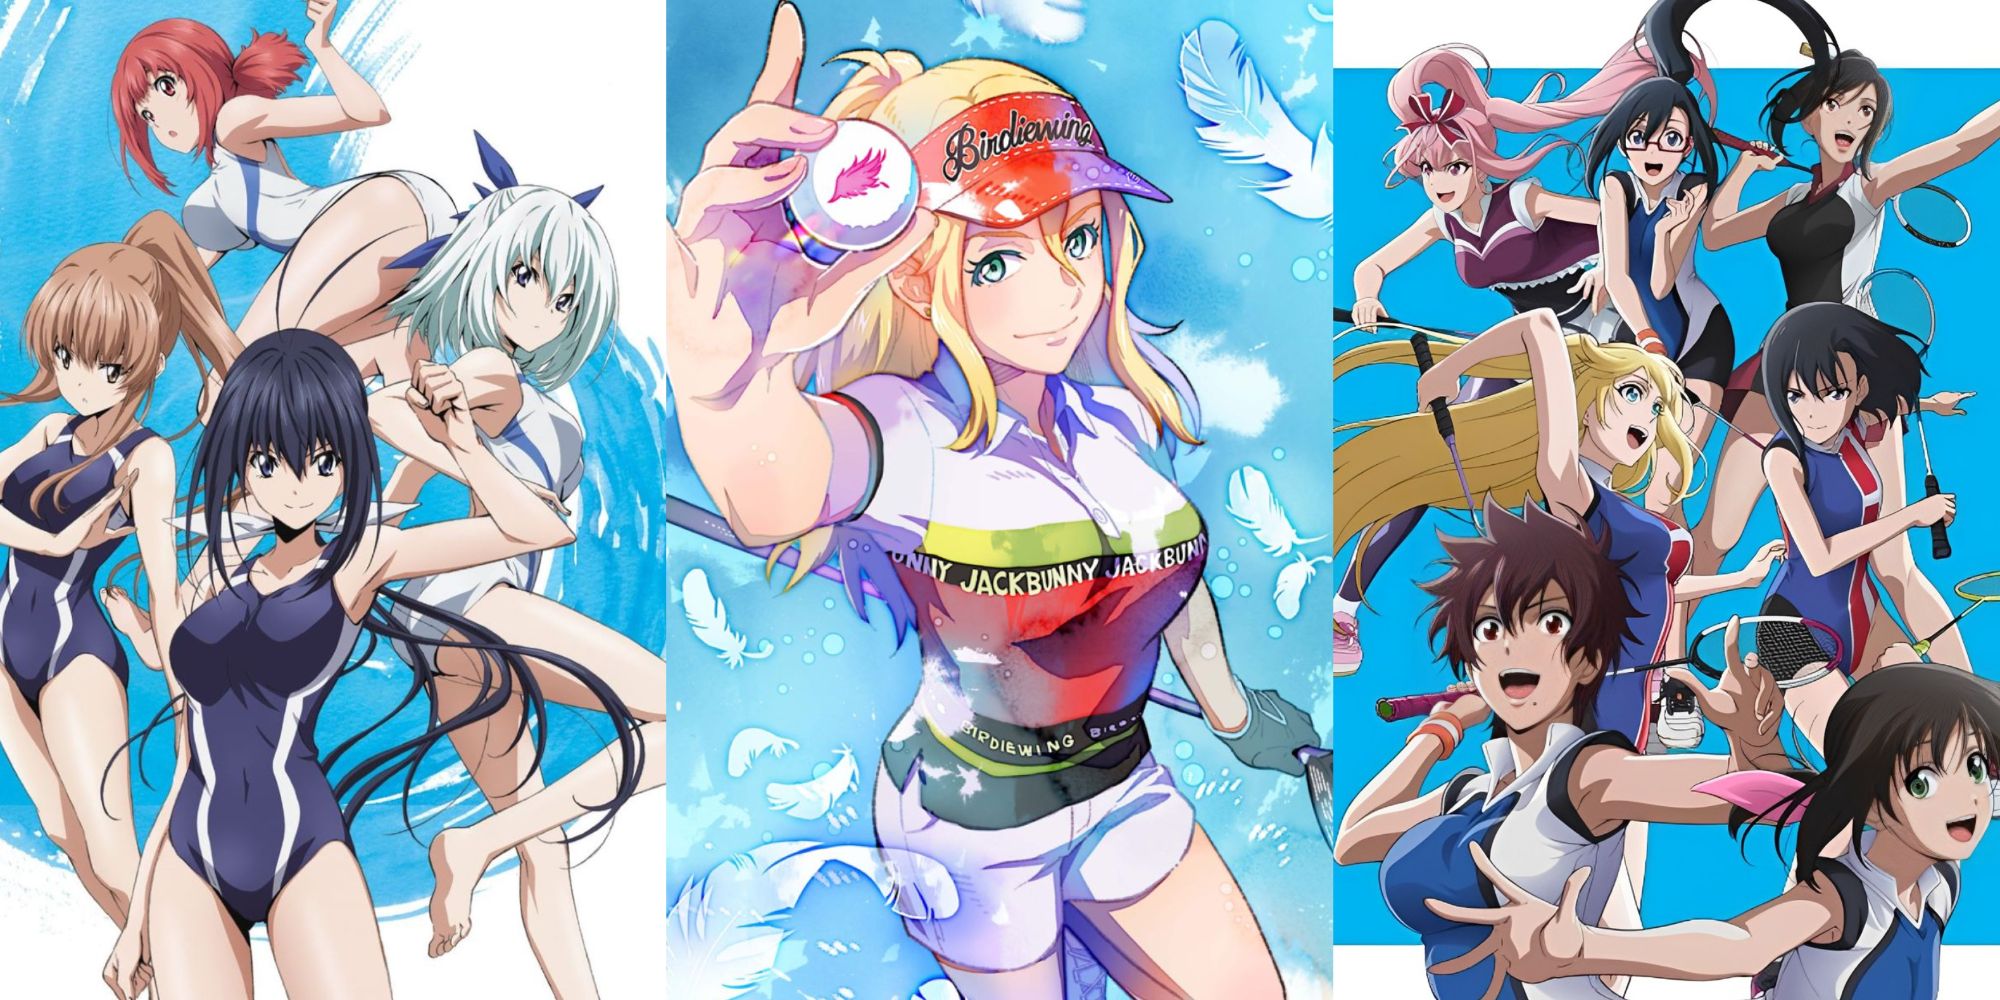 Important characters from Keijo, Birdie Wing, and Hanebado getting ready to play sports